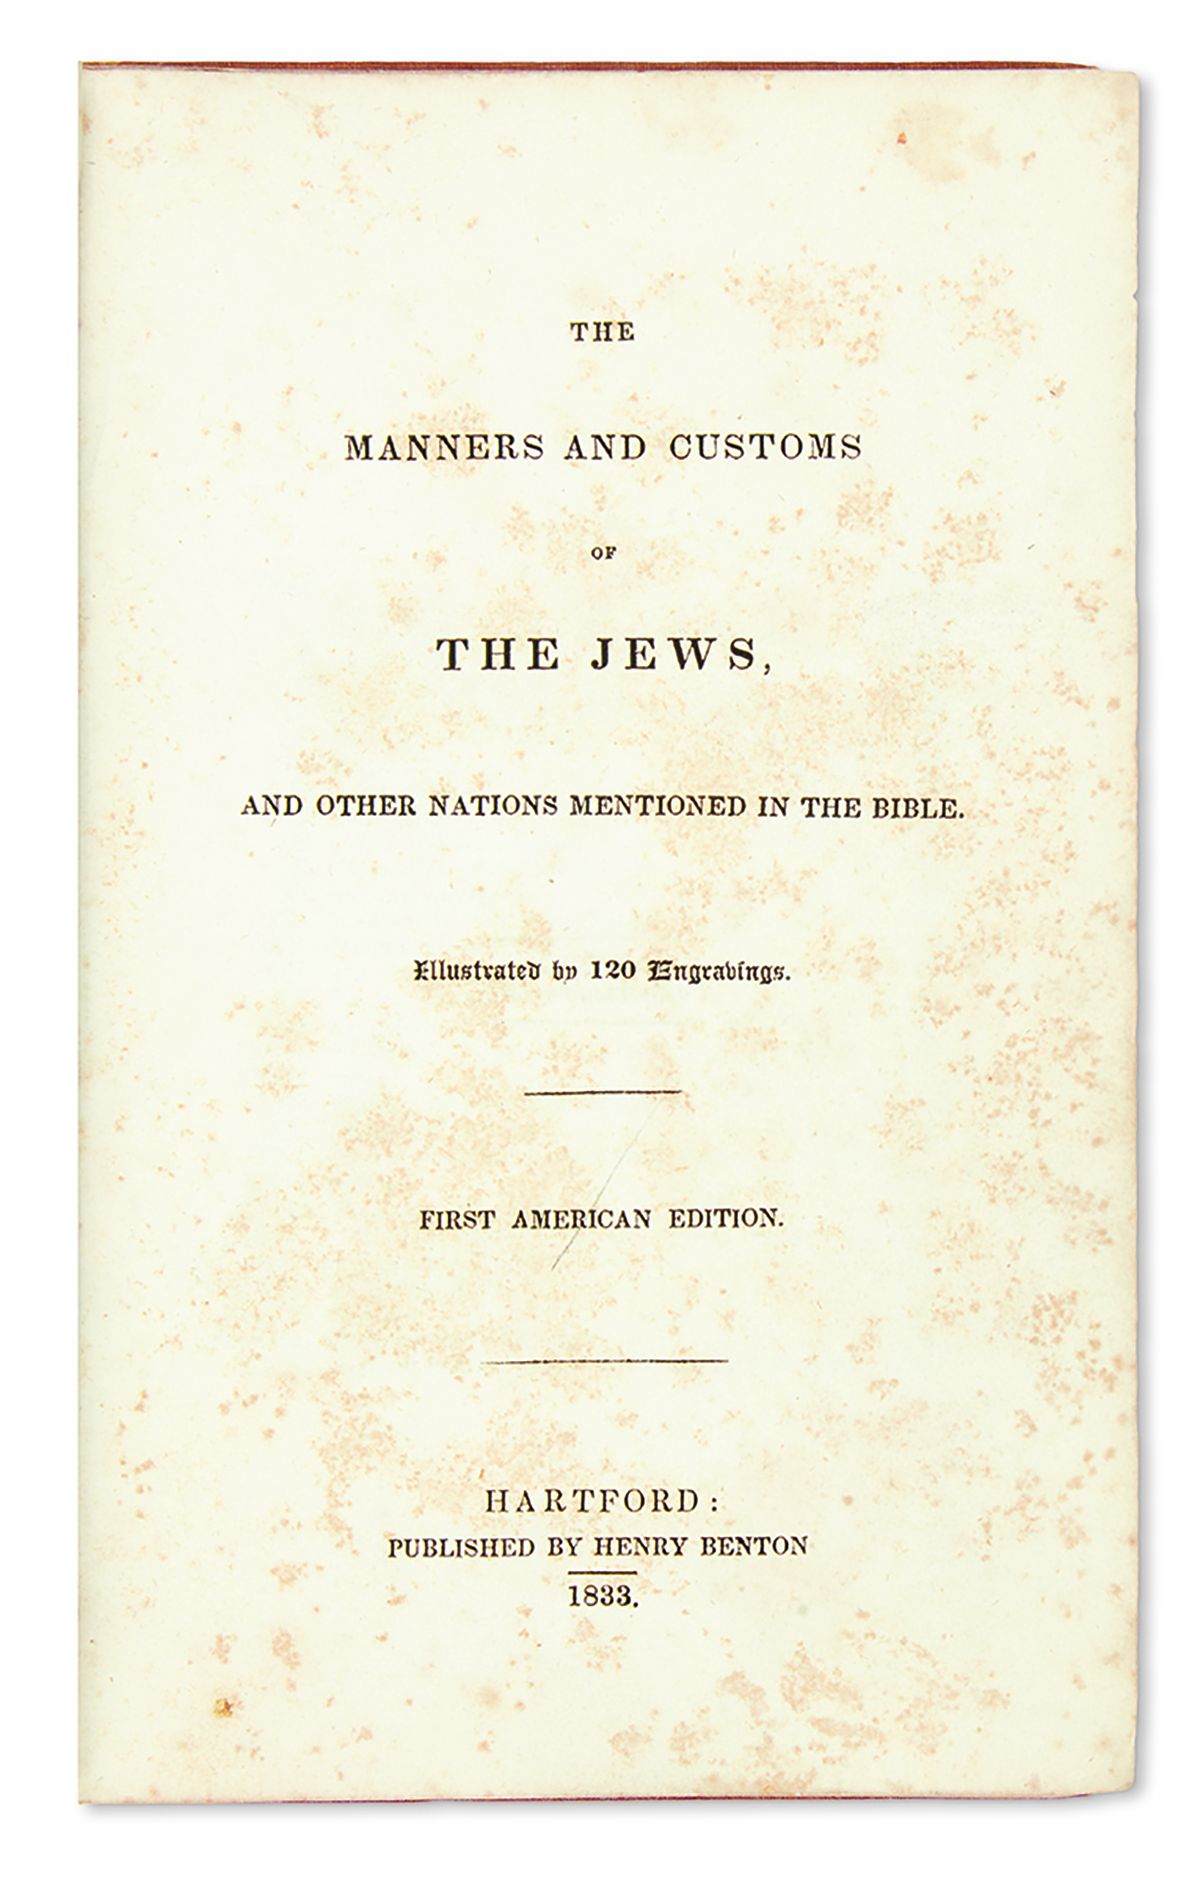 (George Stokes). The Manners and Customs of the Jews